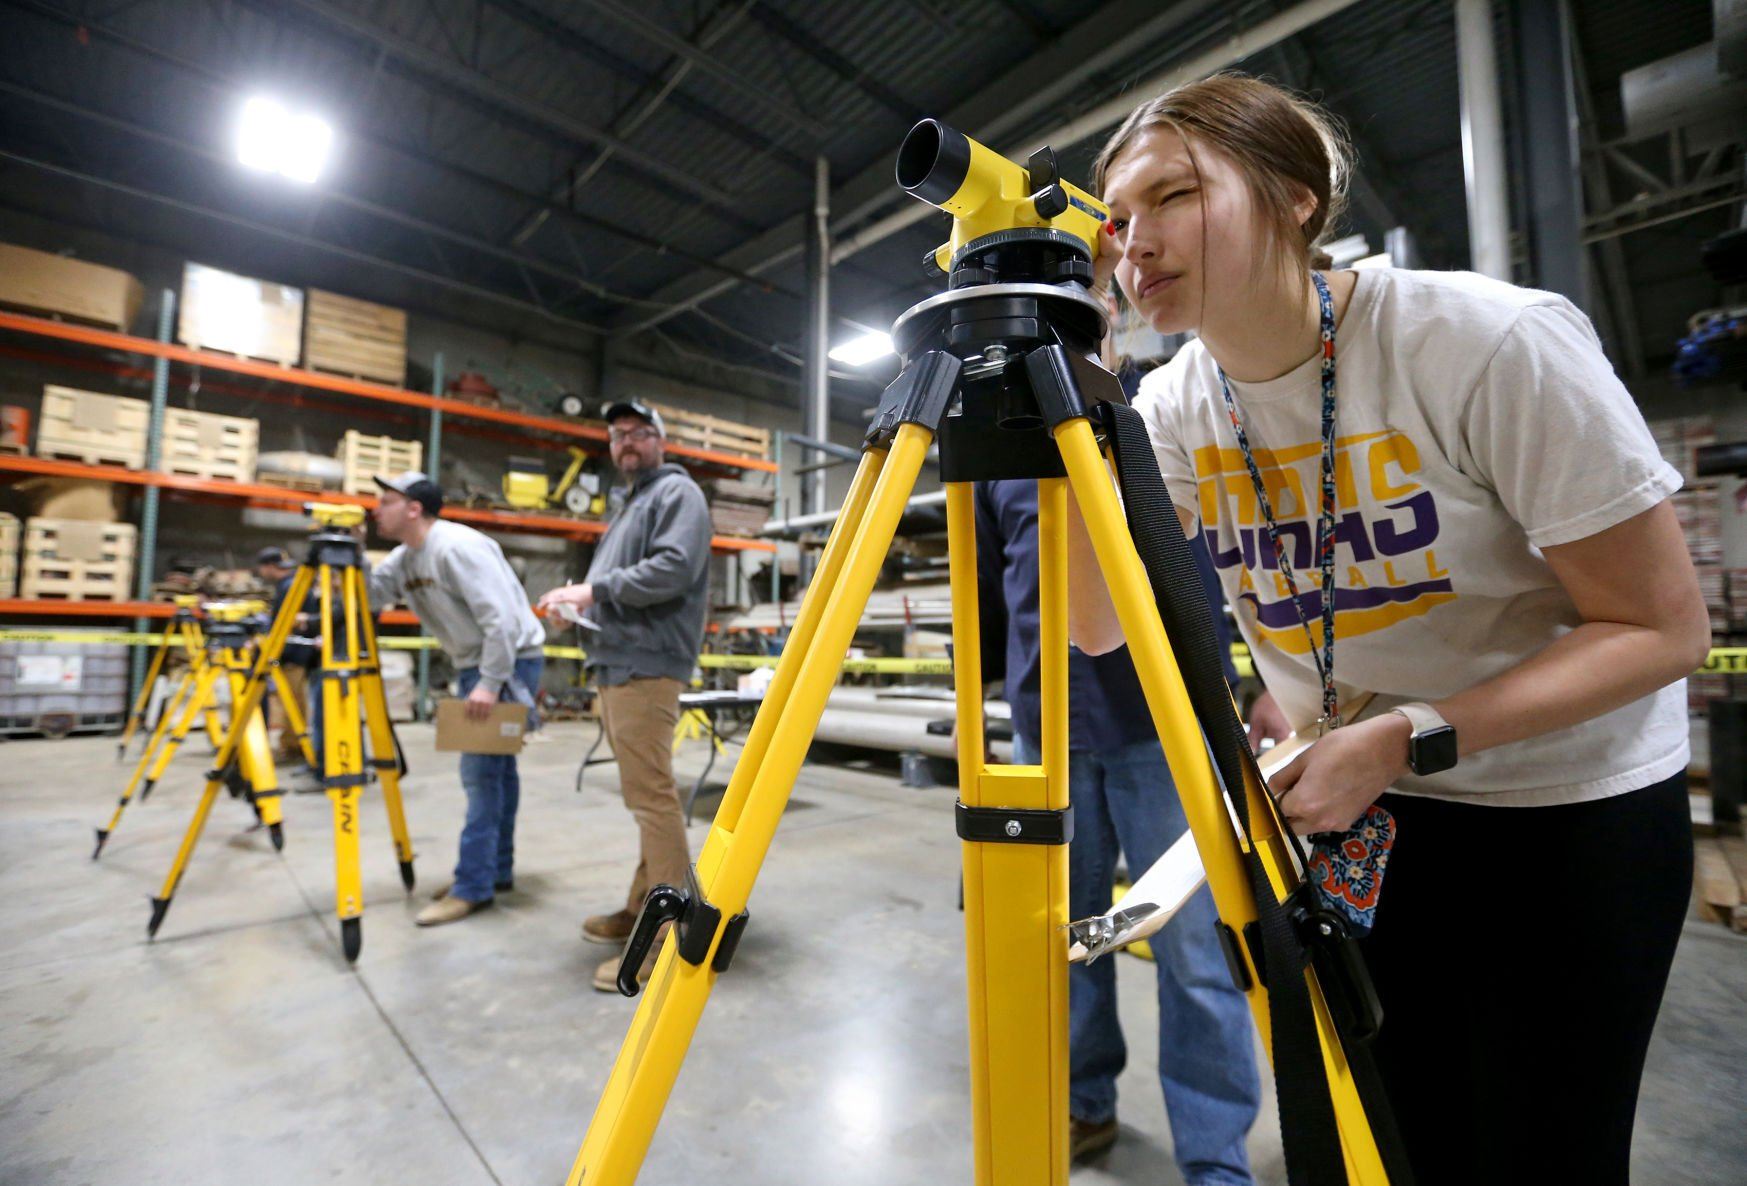 Alexis Stratton, a sophomore at Dubuque Senior High School, looks through a builder’s level during the Construction Industry Career Expo at Portzen Construction in Dubuque on Thursday.    PHOTO CREDIT: JESSICA REILLY